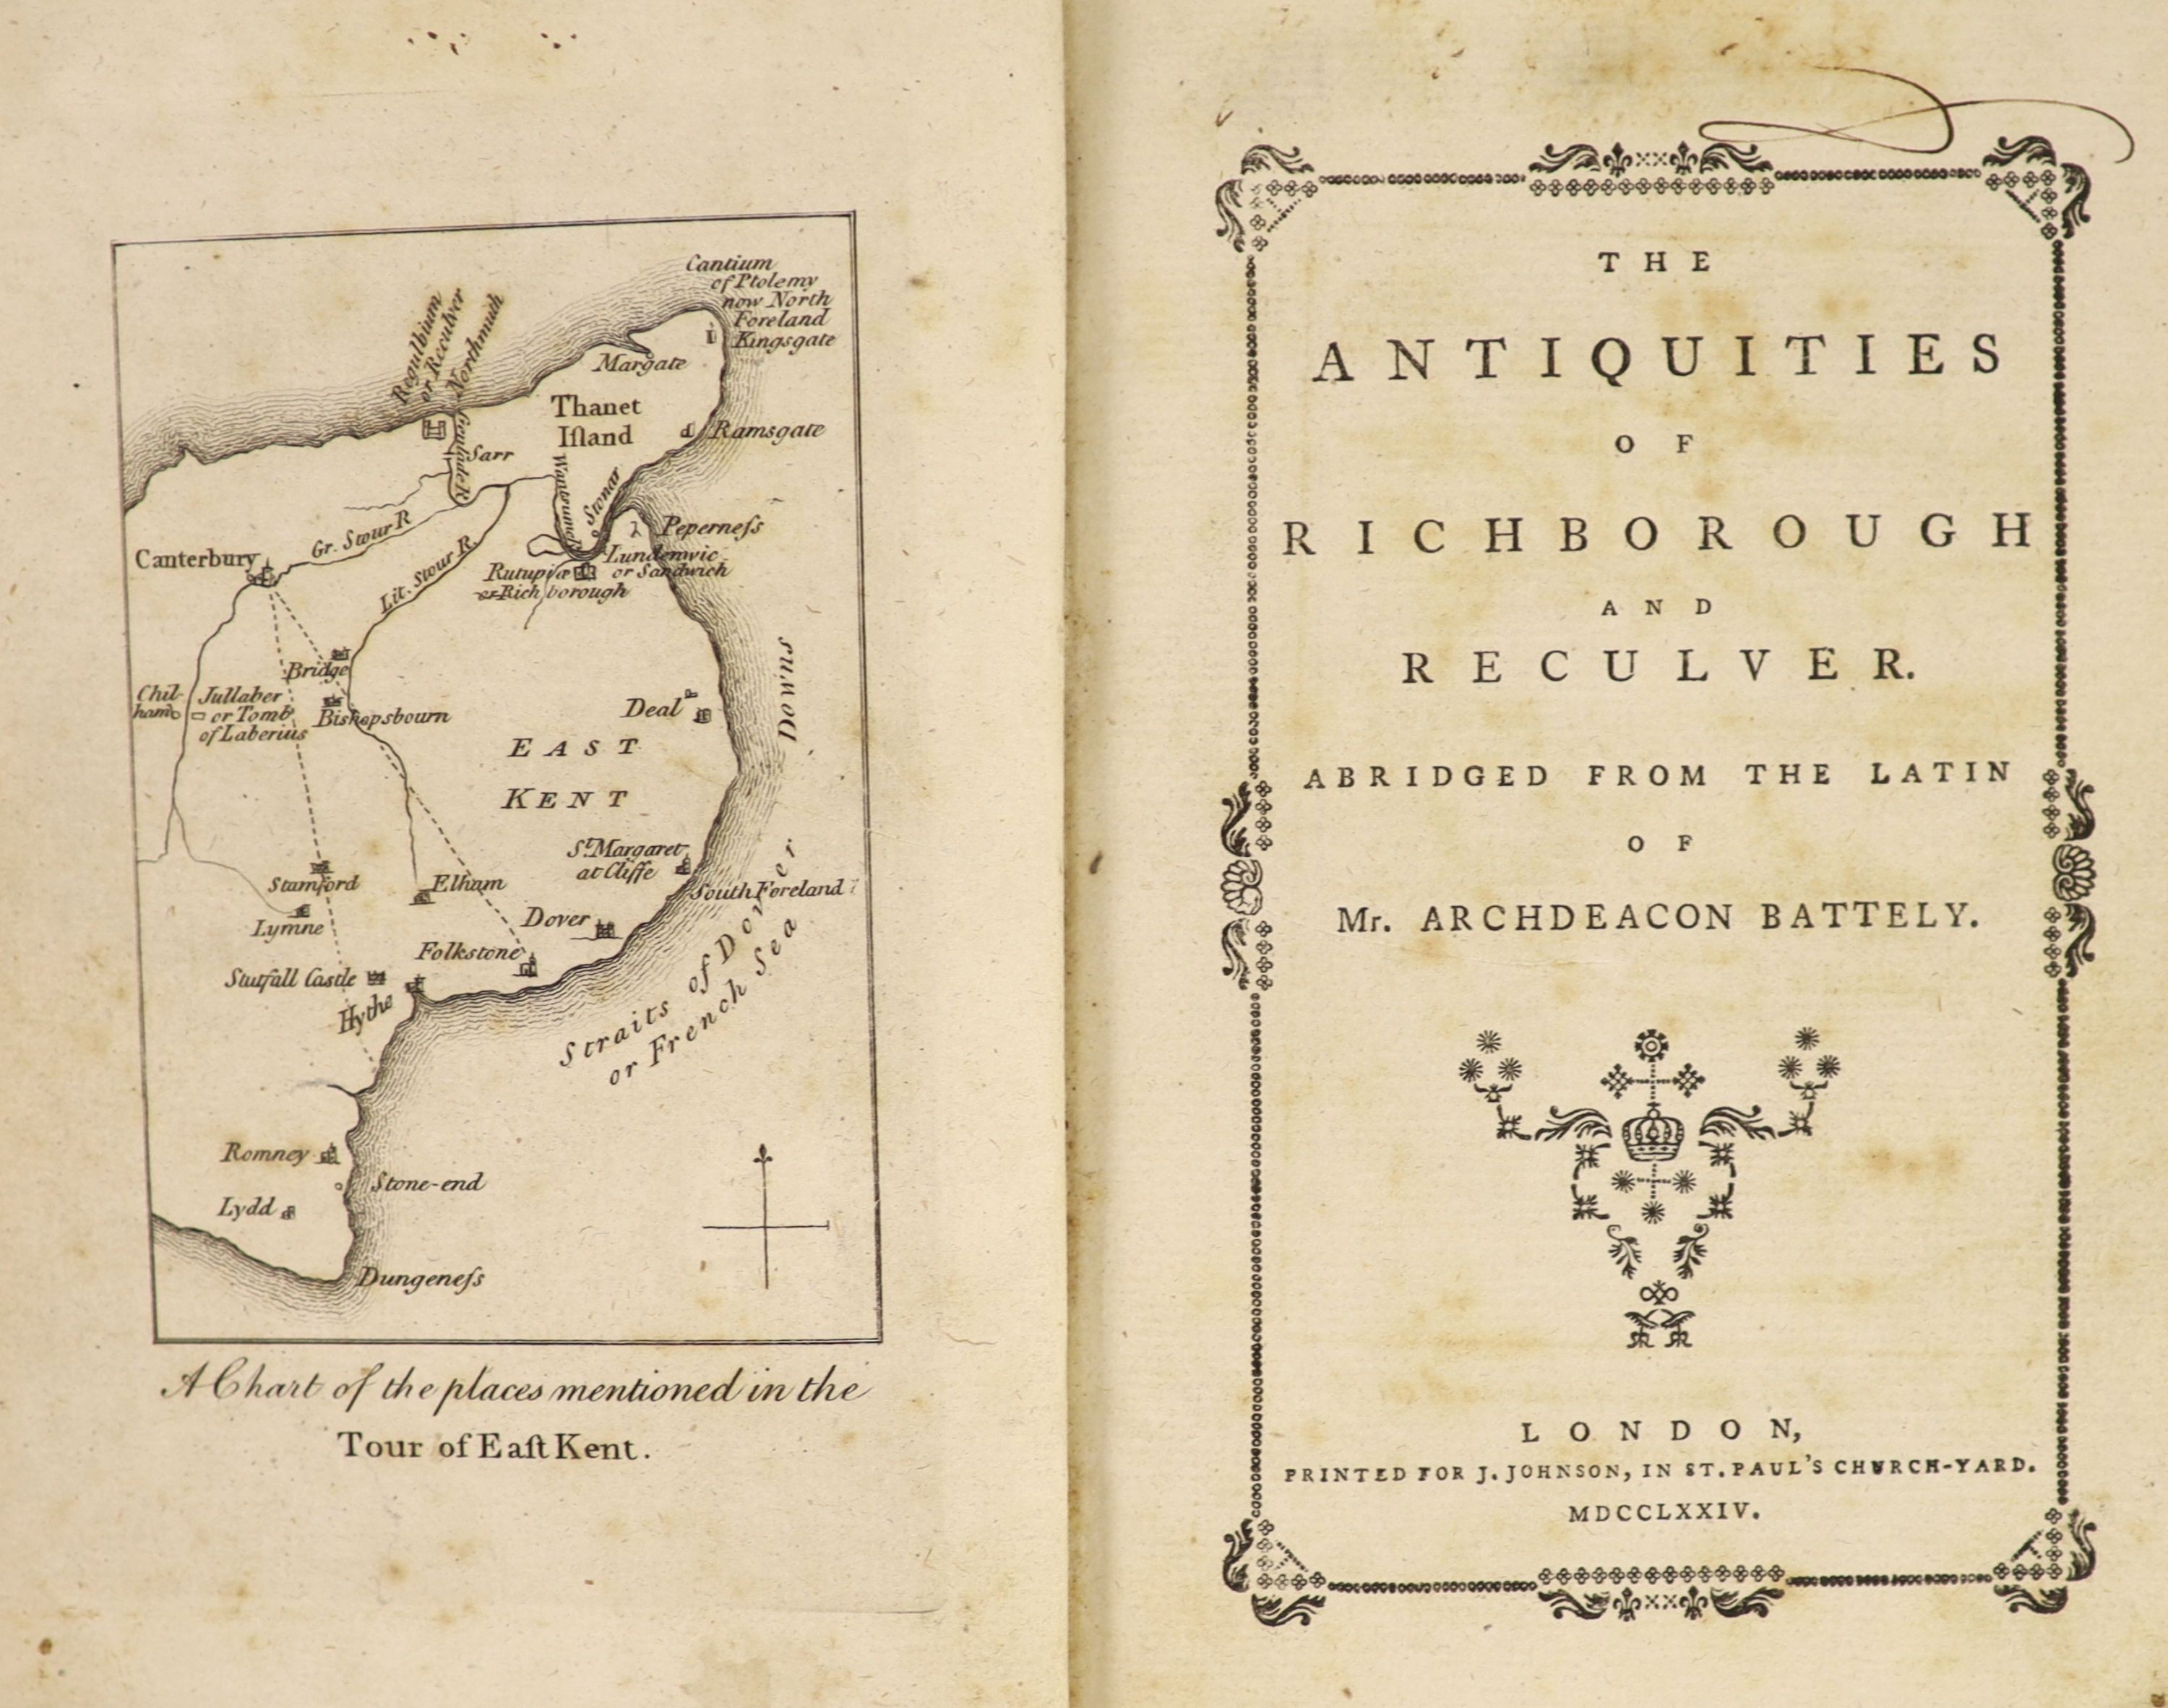 Battely, John. The Antiquities of Richborough and Reculver Abridged from the Latin of Archdeacon Battley. London, 1774.